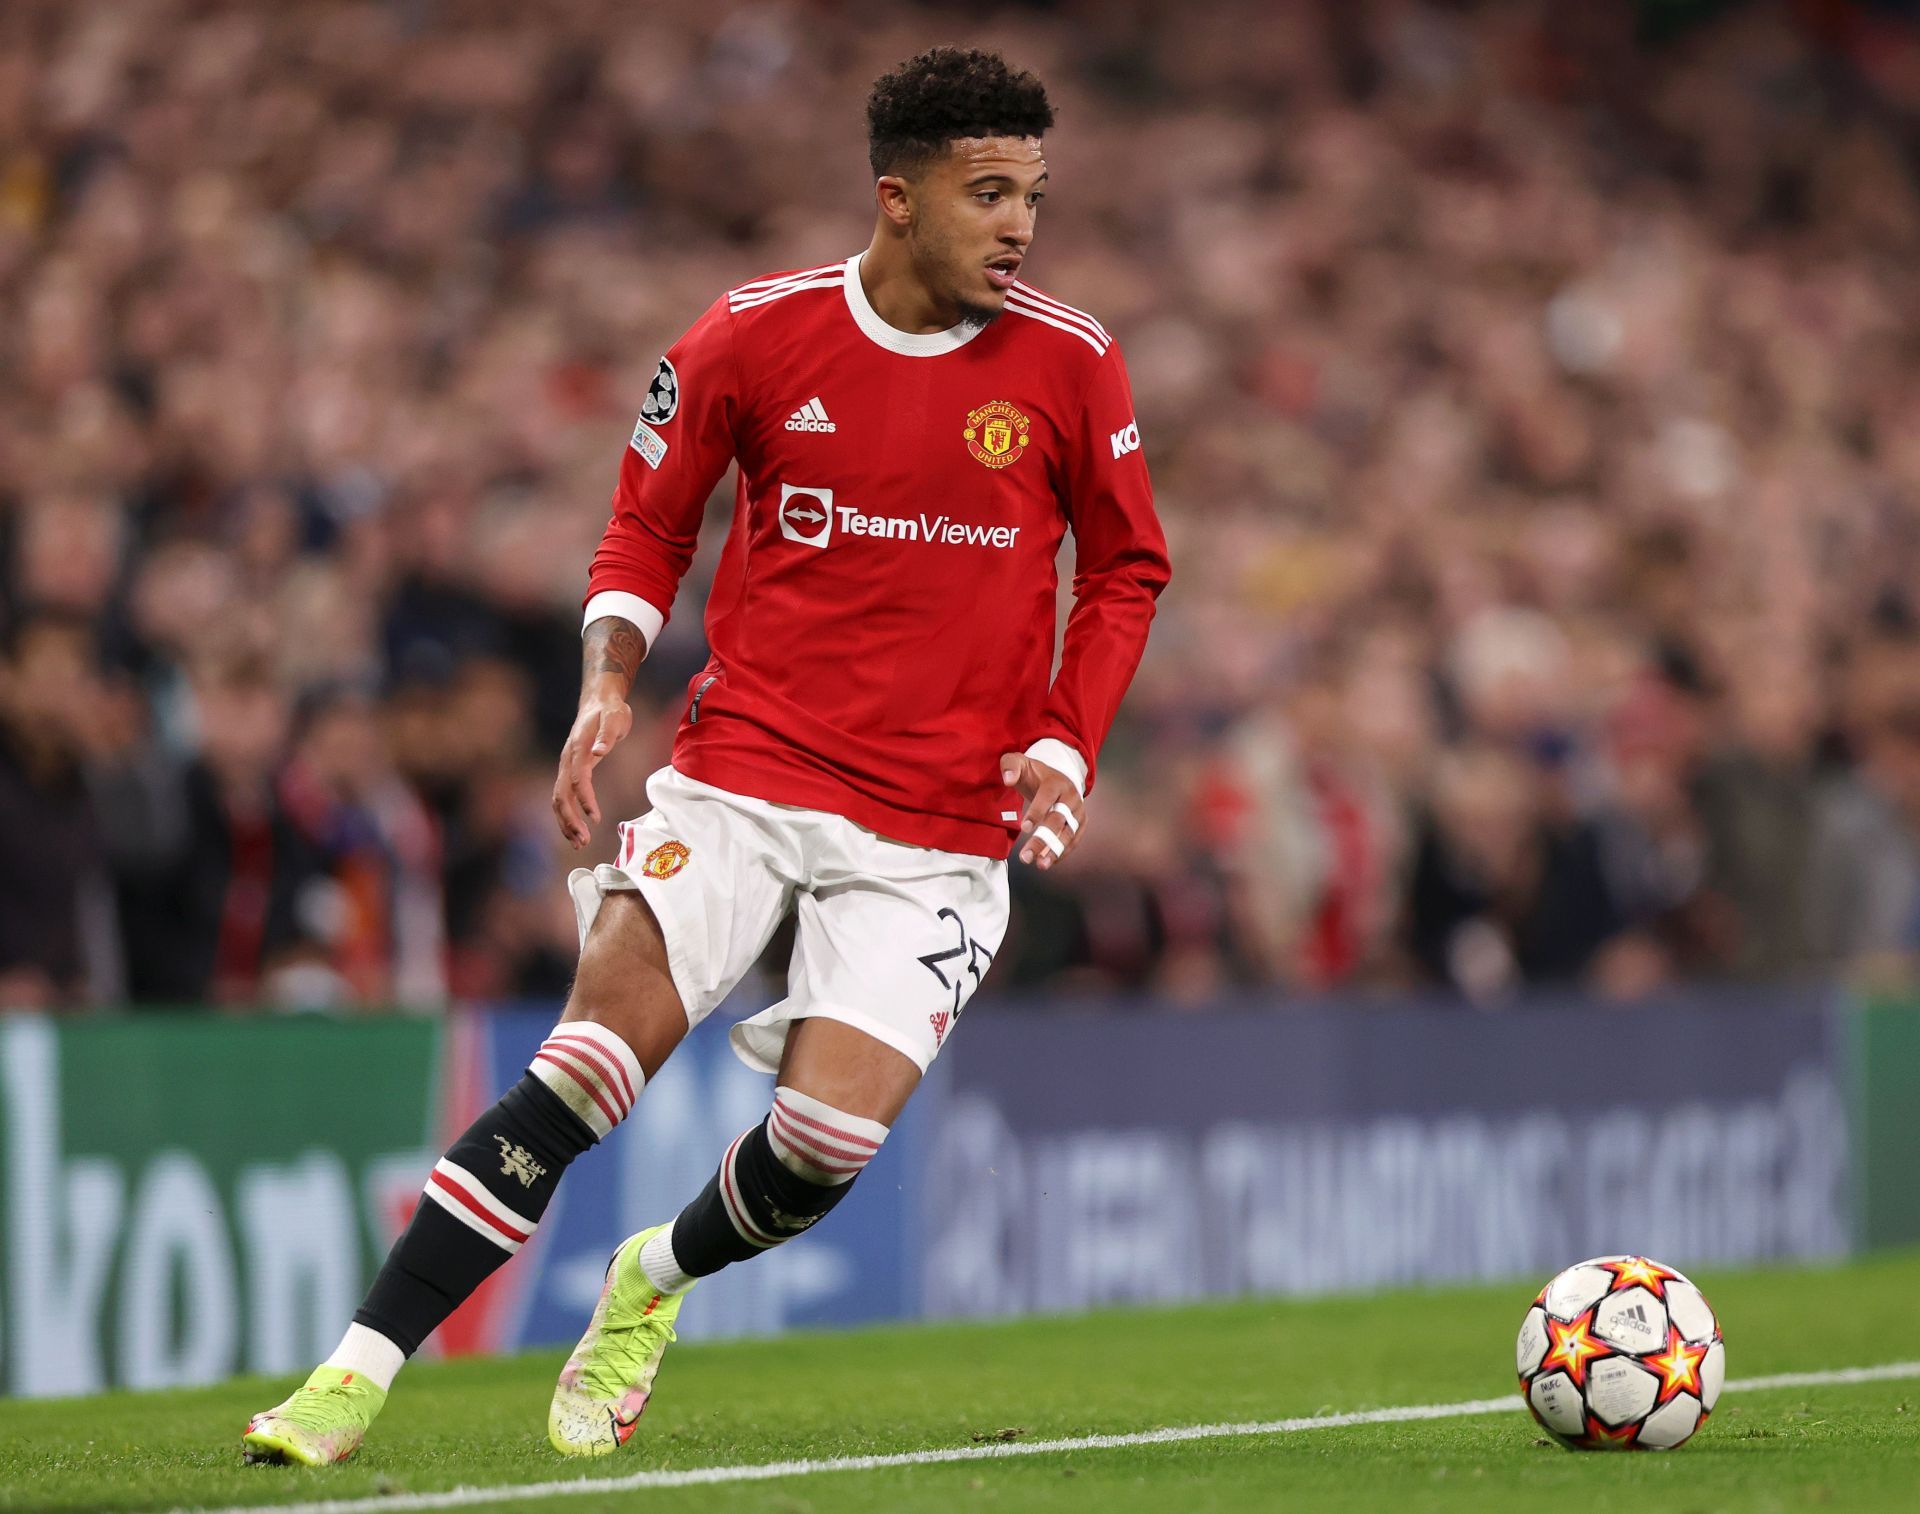 Ole Gunnar Solskjaer believes Jadon Sancho will play a lot of games for Manchester United